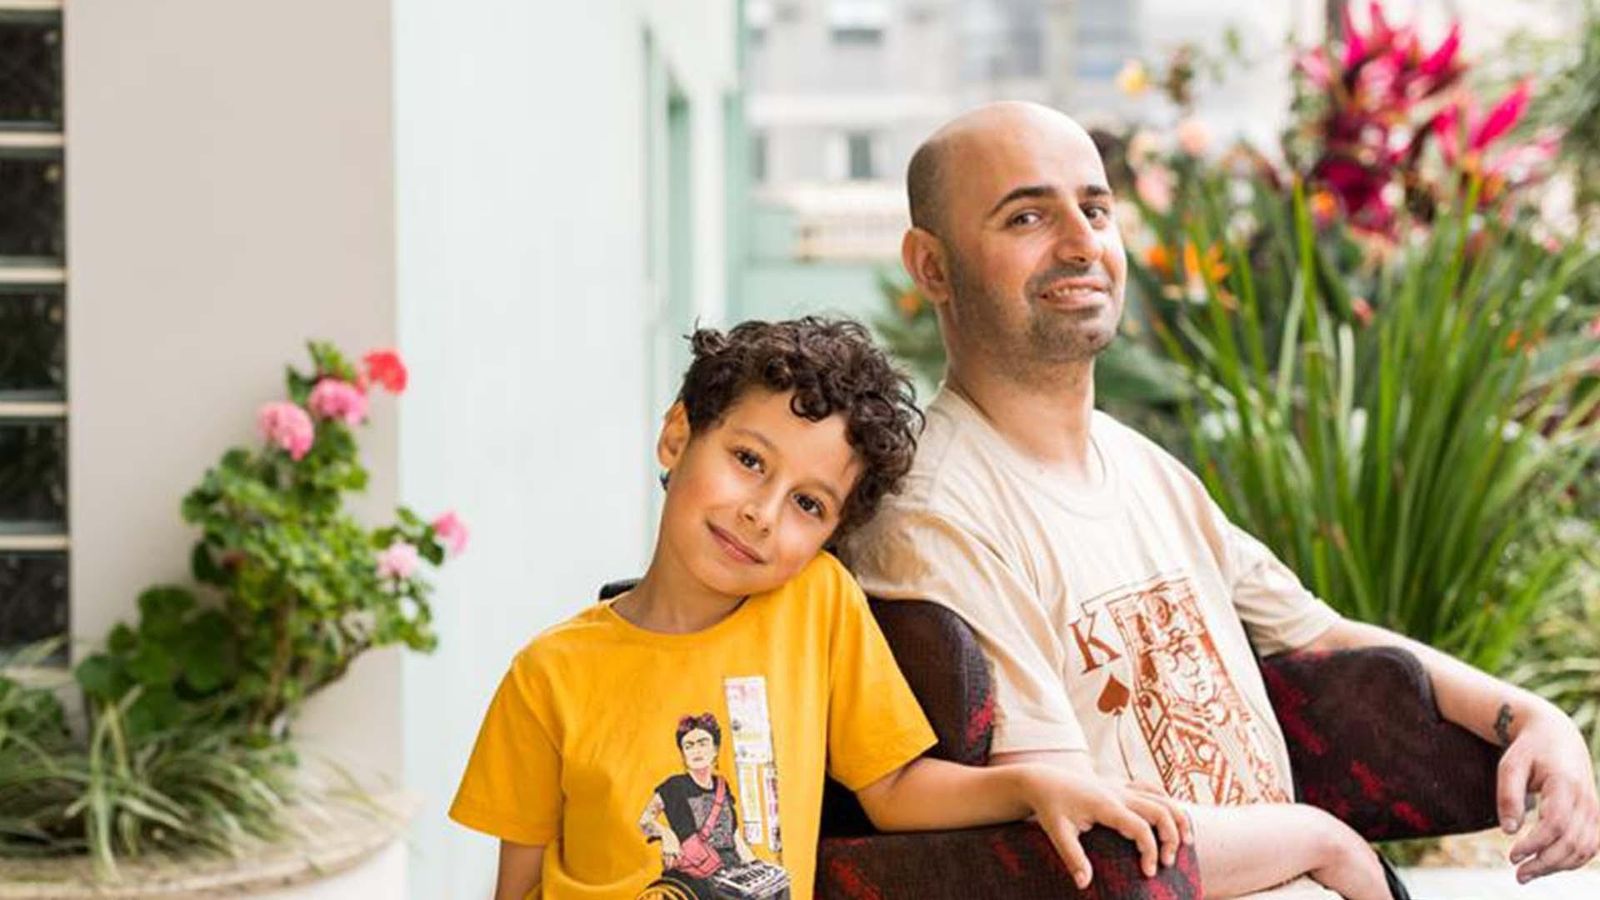 Jaime and his son from Brazil, Primary Progressive Multiple Sclerosis